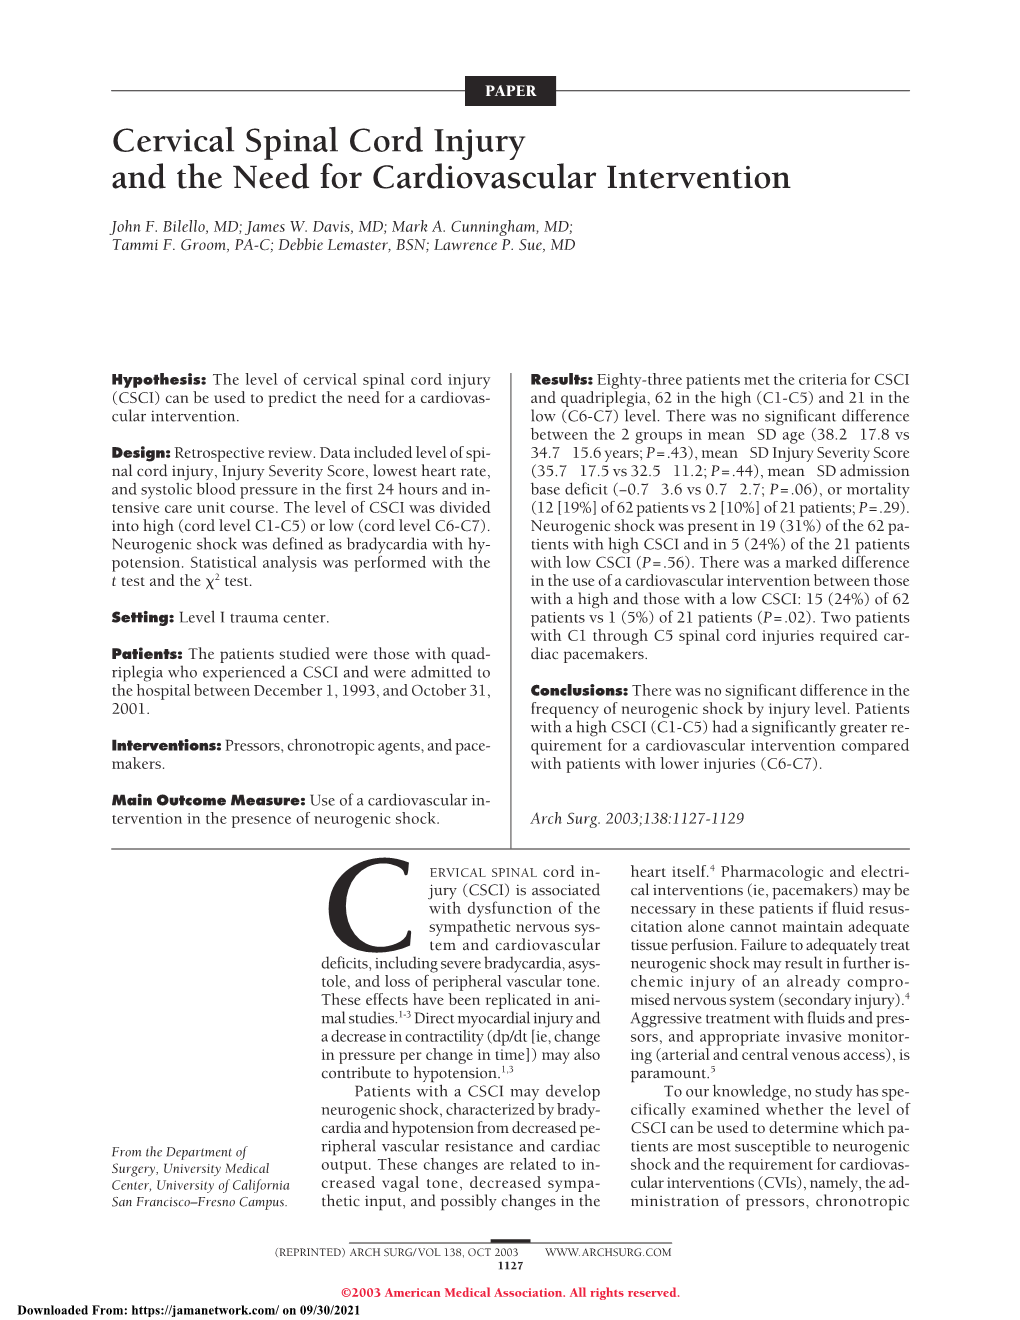 Cervical Spinal Cord Injury and the Need for Cardiovascular Intervention